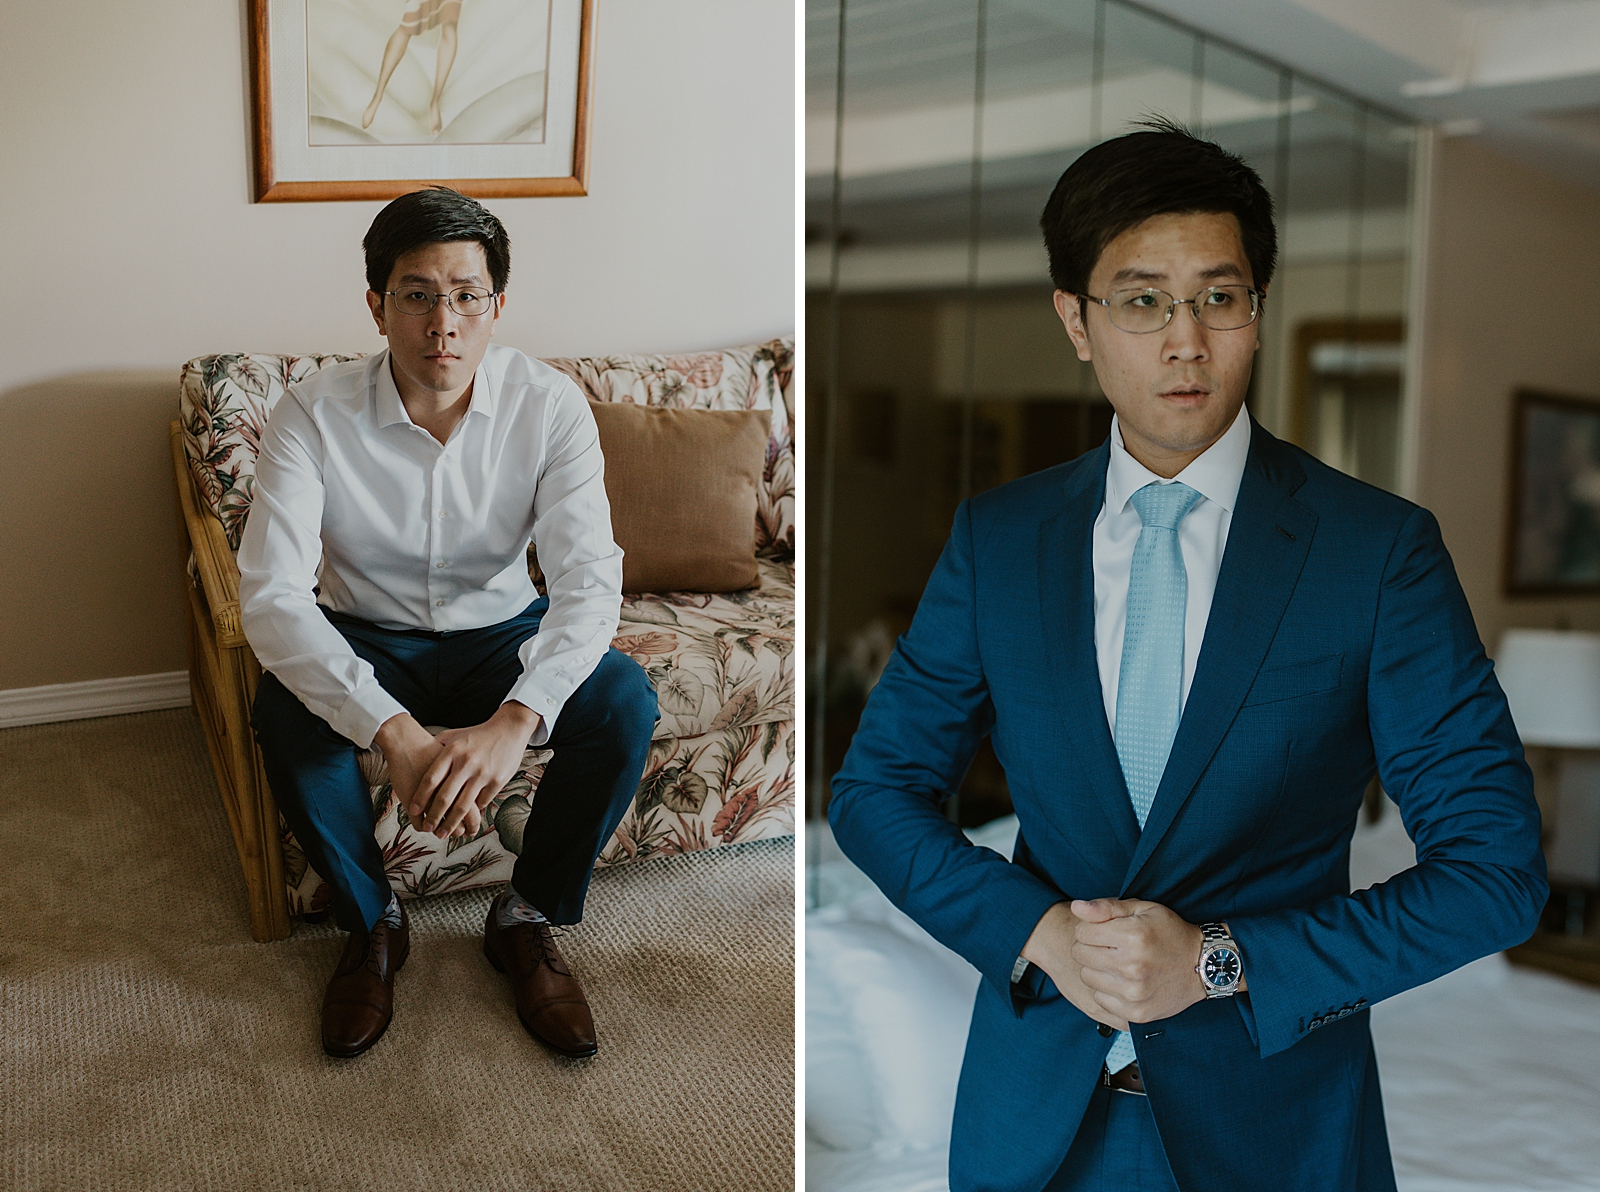 Groom getting ready in hotel room with blue suit